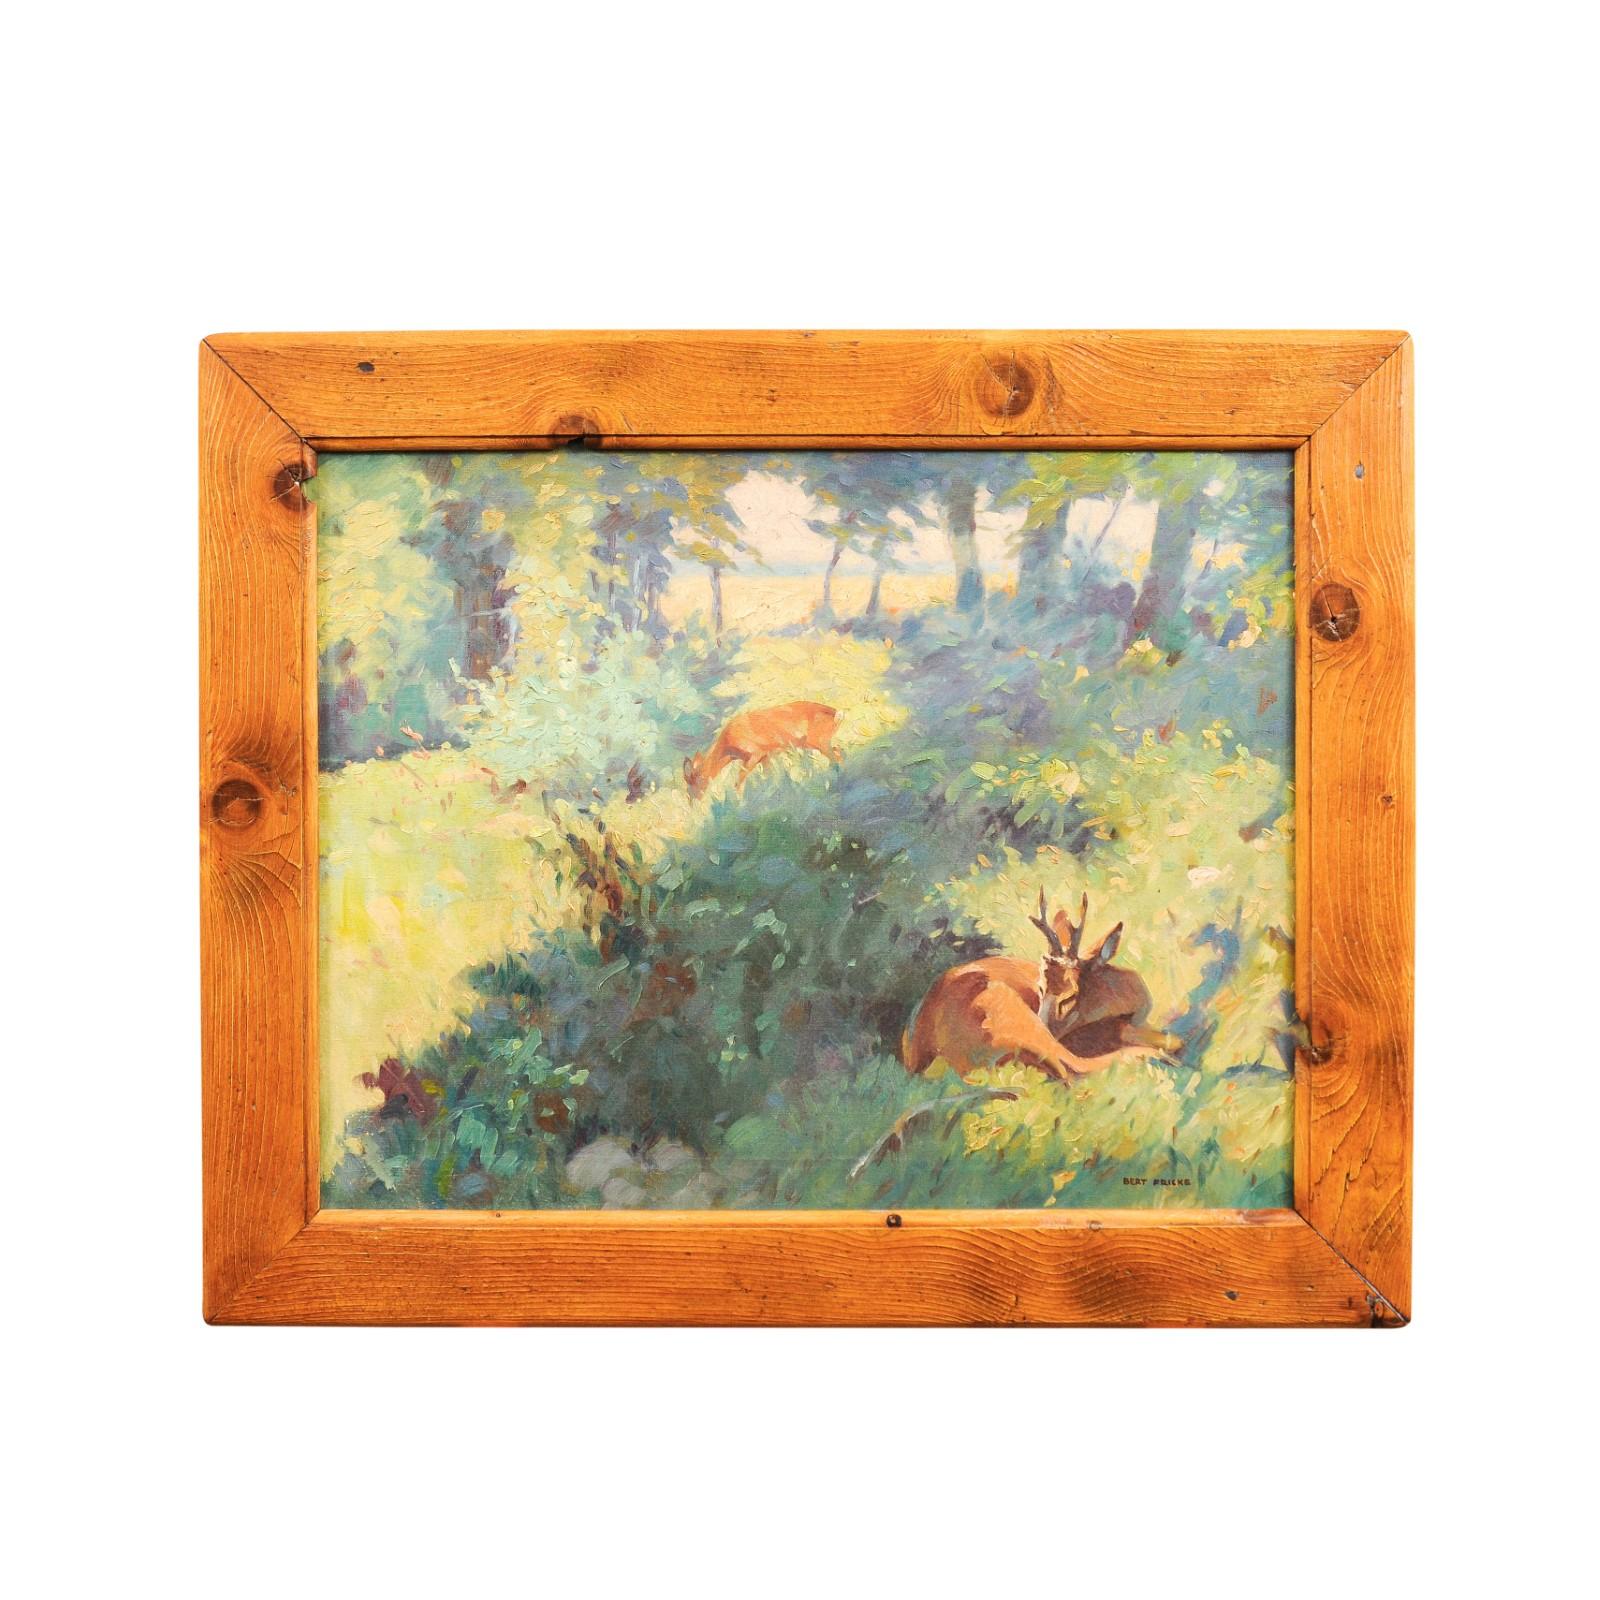 A German oil on panel painting by Bert Fricke Wolfenbuttel titled 'Deer in the Woods' from the early 20th century, in natural wooden frame. Created in Germany during the first quarter of the 20th century, this horizontal oil on panel painting